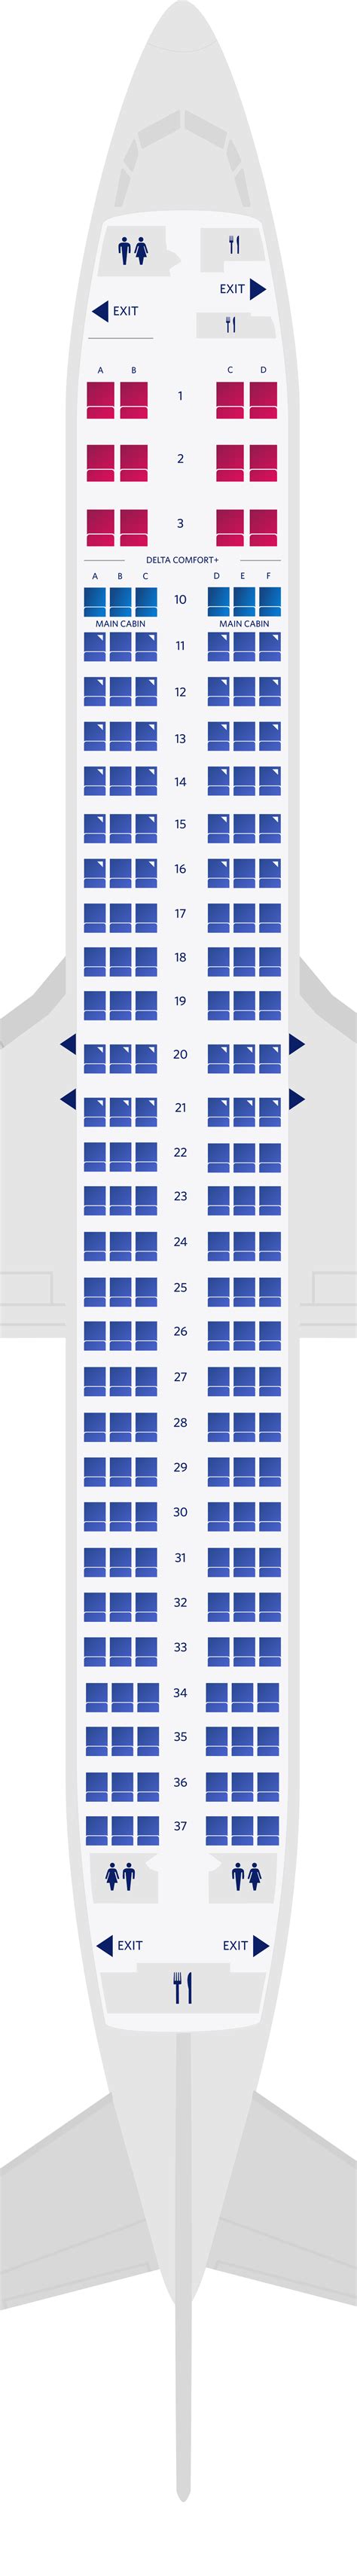 Delta seat map 737. Delta has Airbus manufactured A321-200 in its fleet. The precise configuration chosen by the airline could be found in our search and will determine the Airbus A321's seating map capacity. Airbus A321-200 typically seats 190 passengers with 3-class layout with both business, premium and economy seats. The aircraft is famous for its cutting-edge ... 